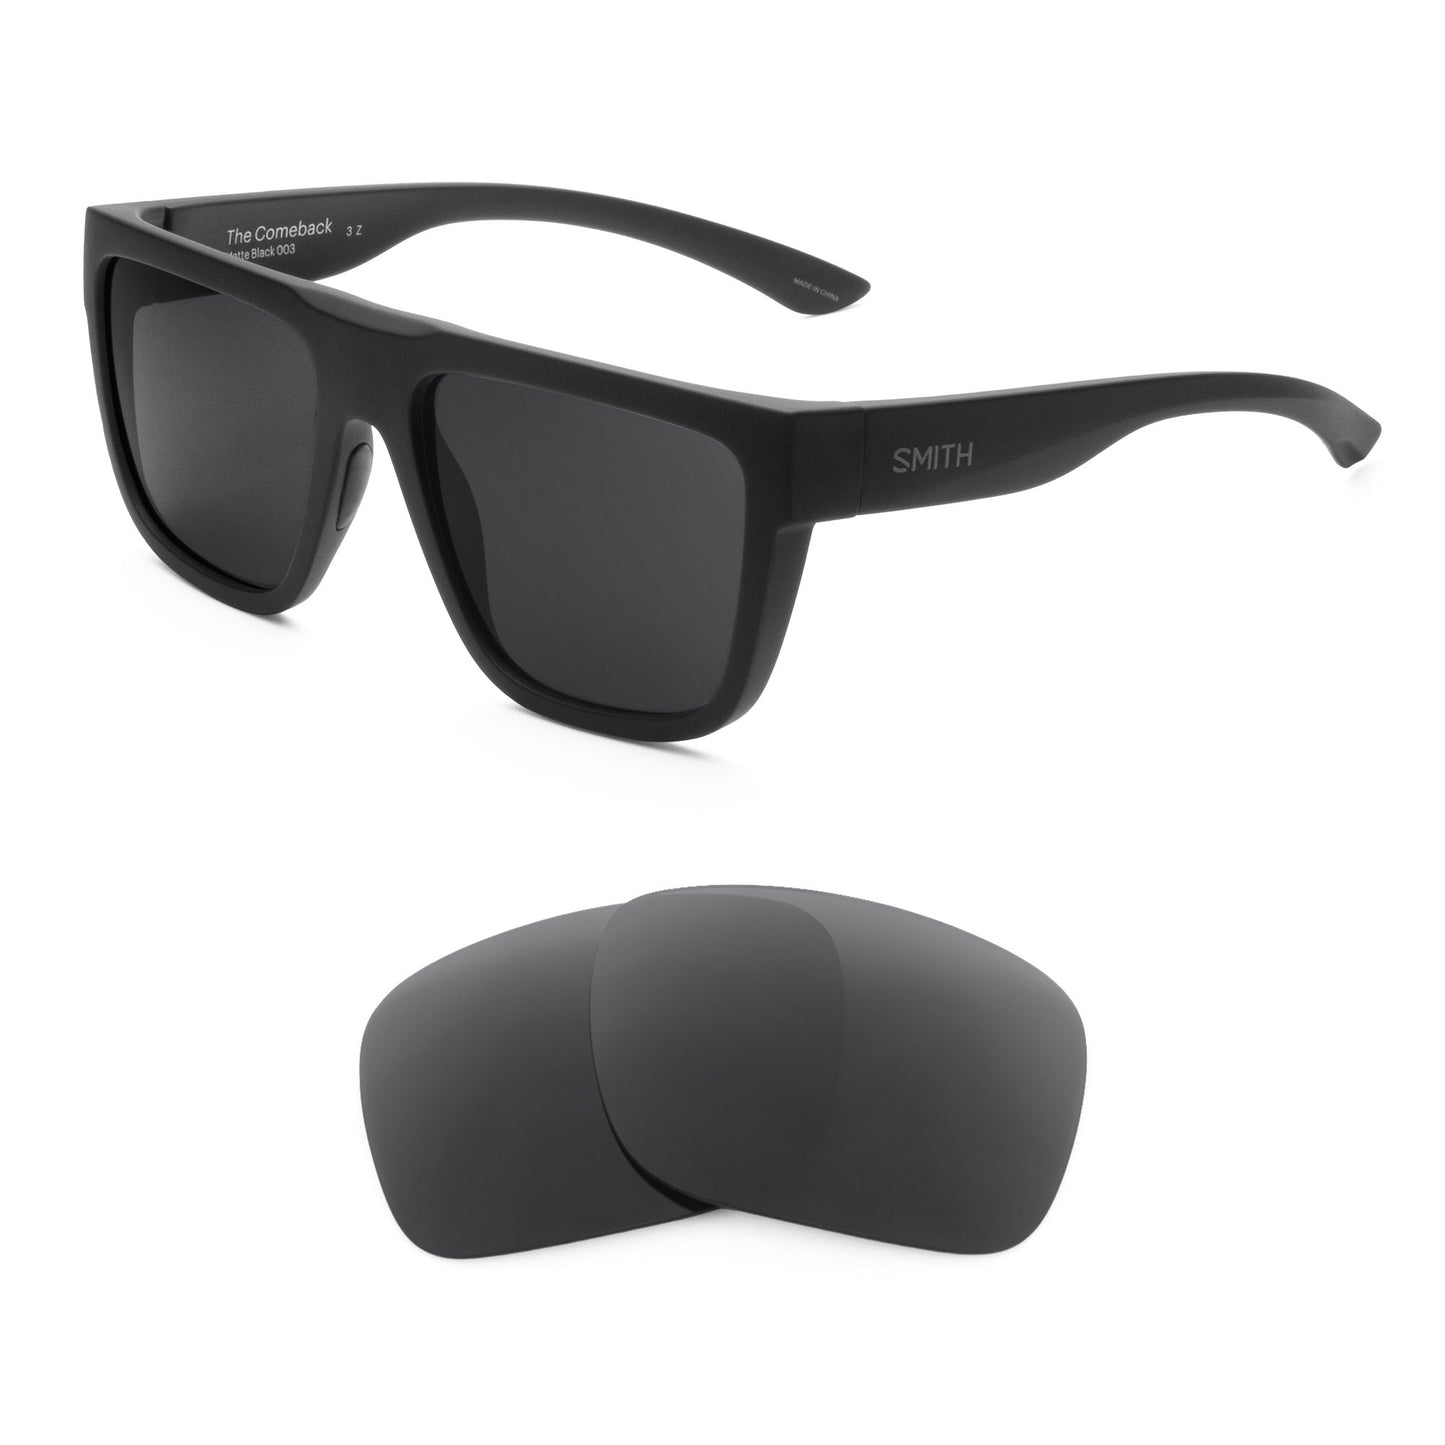 Smith The Comeback sunglasses with replacement lenses